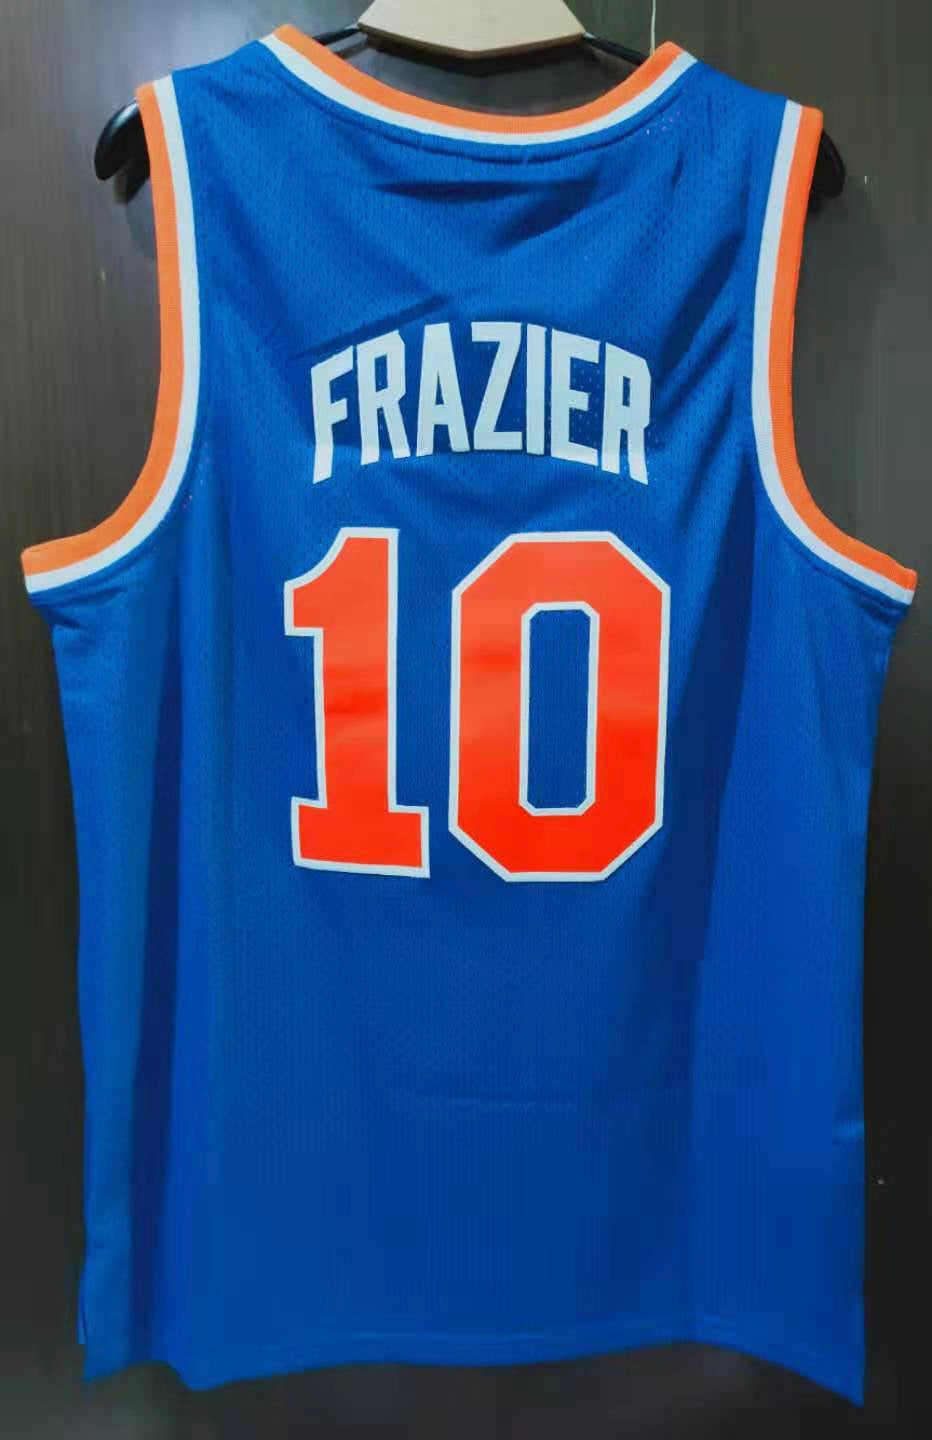 This week in Knicks history: Walt Clyde Frazier's jersey gets